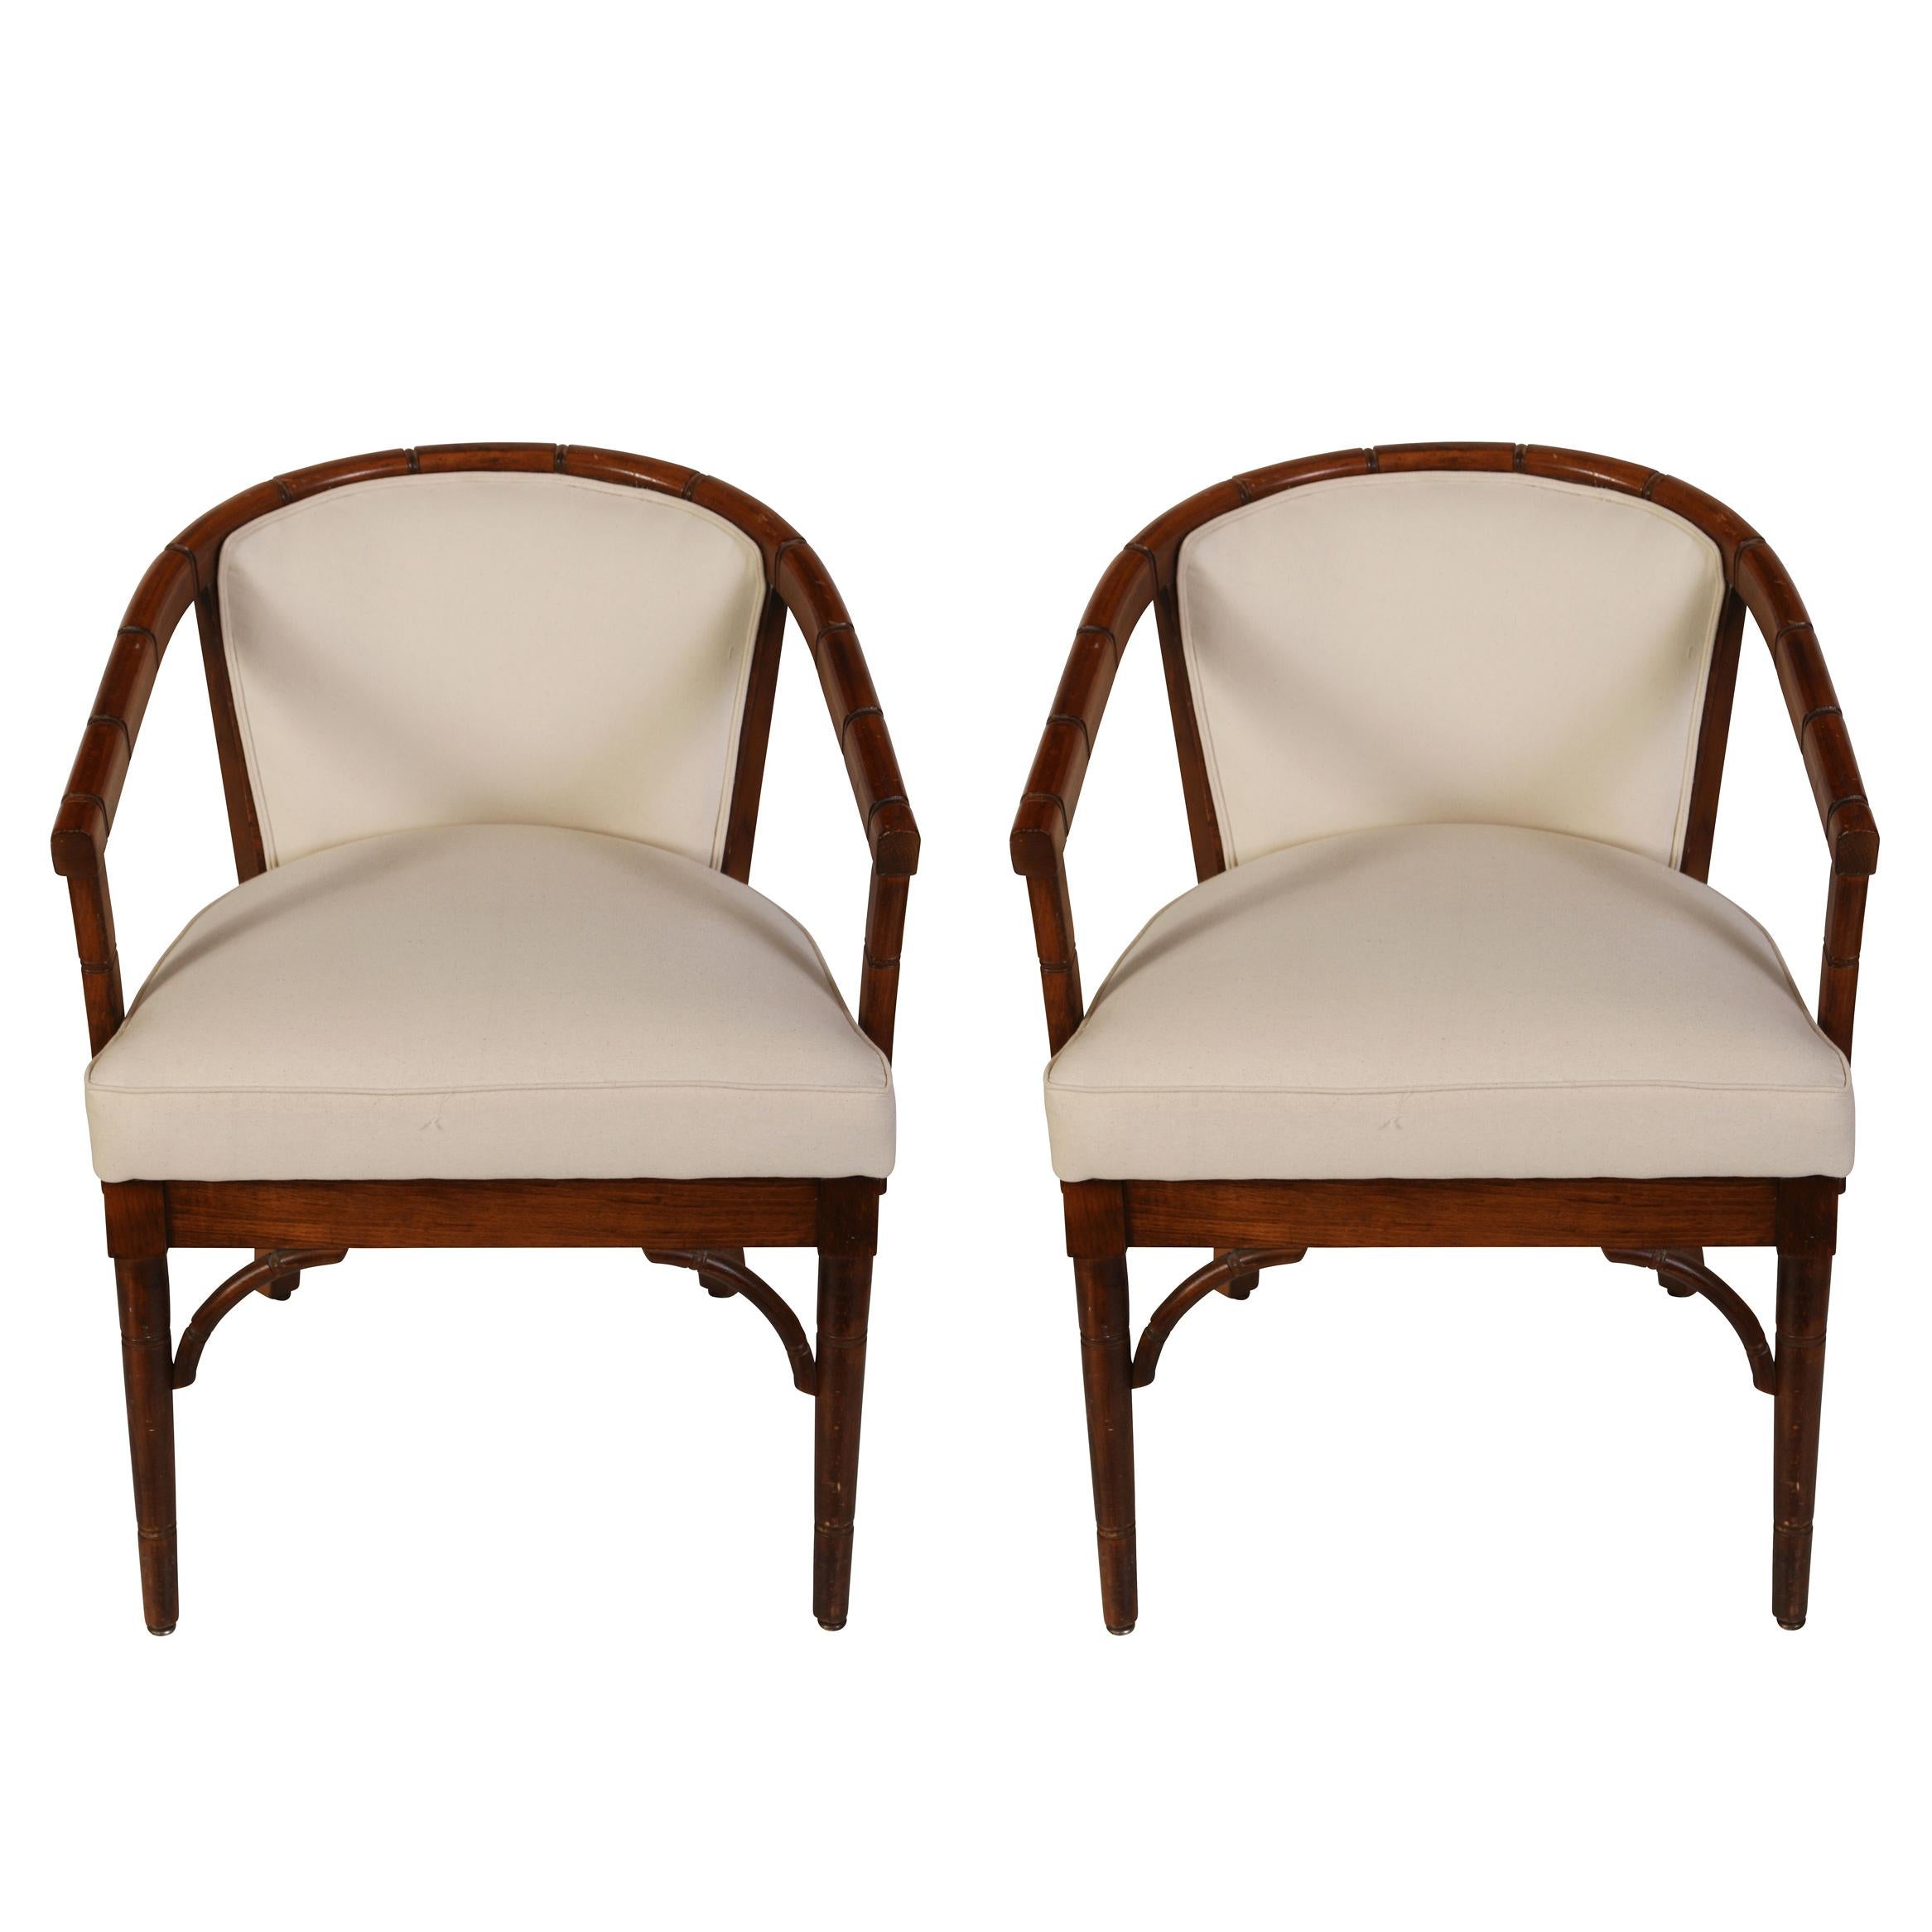 A stylish pair of faux bamboo arm chairs with a curved tight back, a tight seating lovely detail at the apron, at base of seat.  Covered in a simple white muslin, this duo is ready for its new home! Please note chairs are priced individually. 